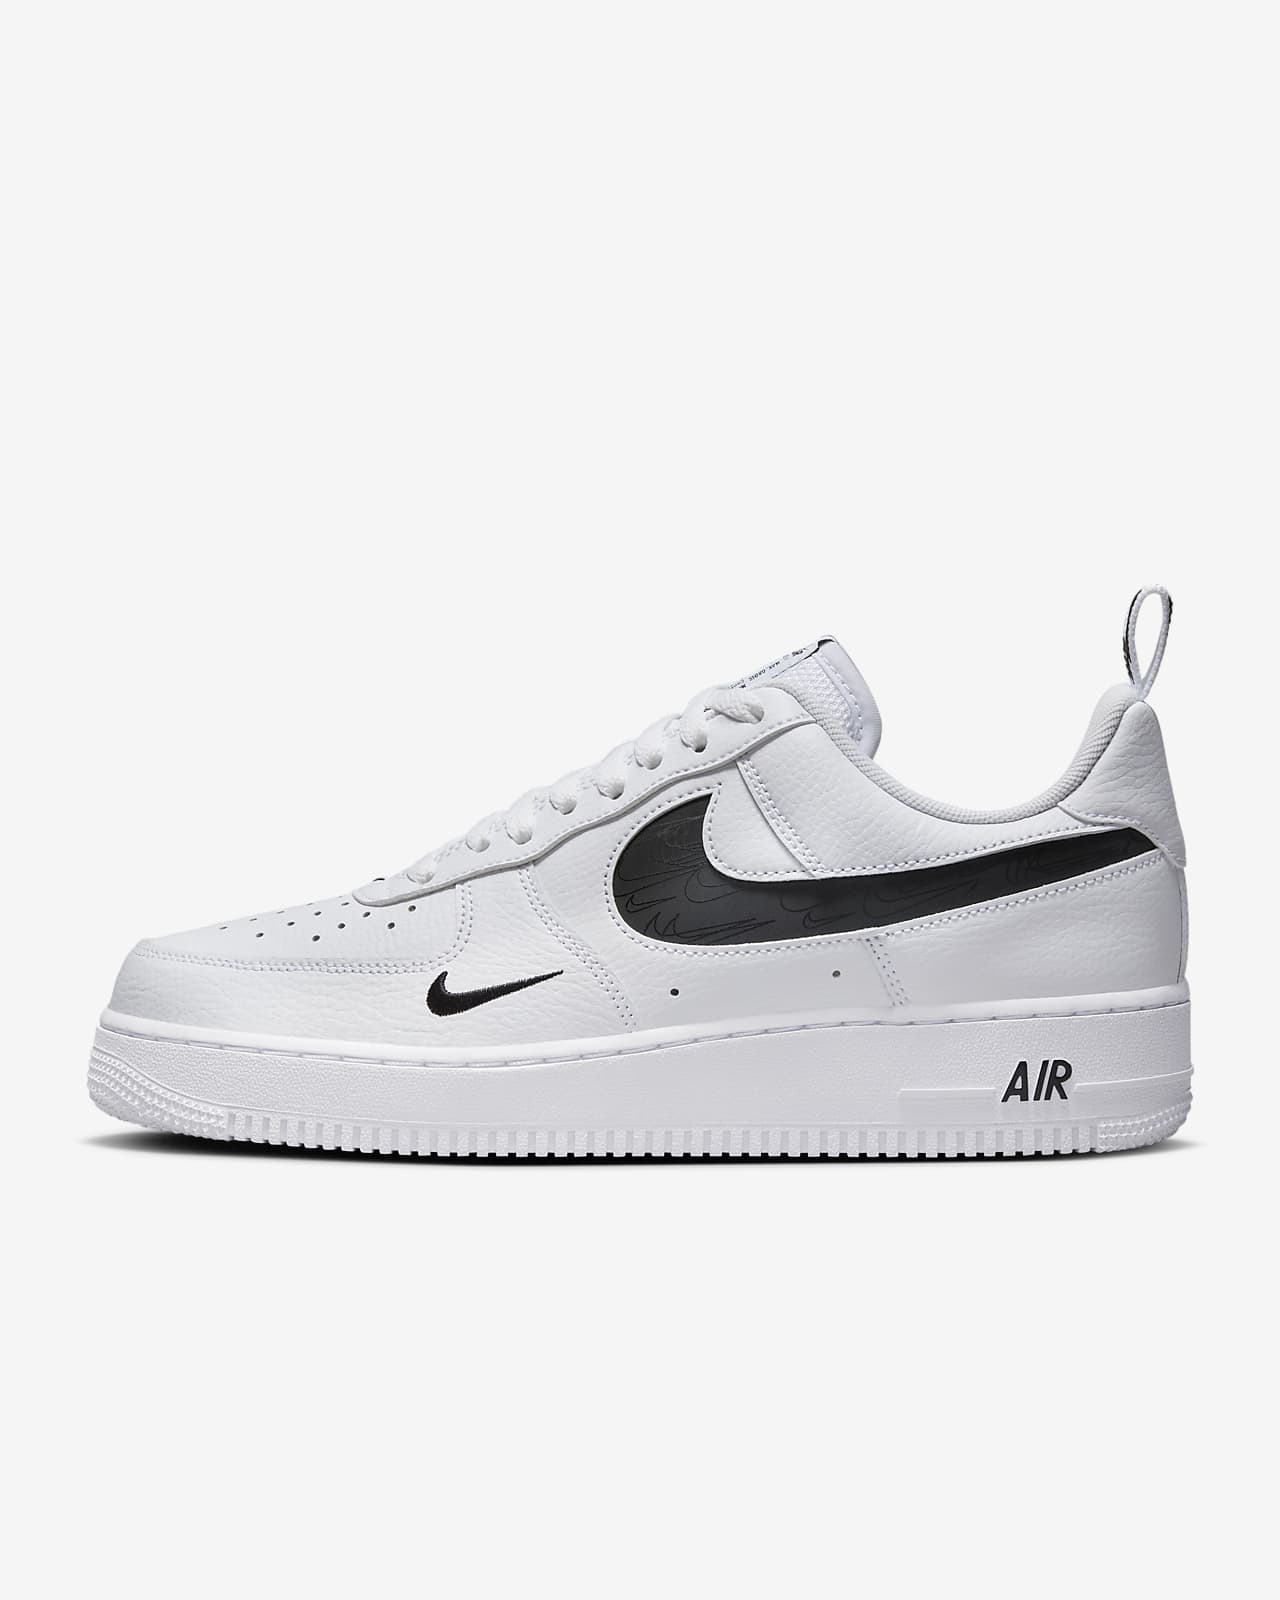 Nike Men's Air Force 1 '07 LV8 Shoes in Black, Size: 9 | Dv2123-001